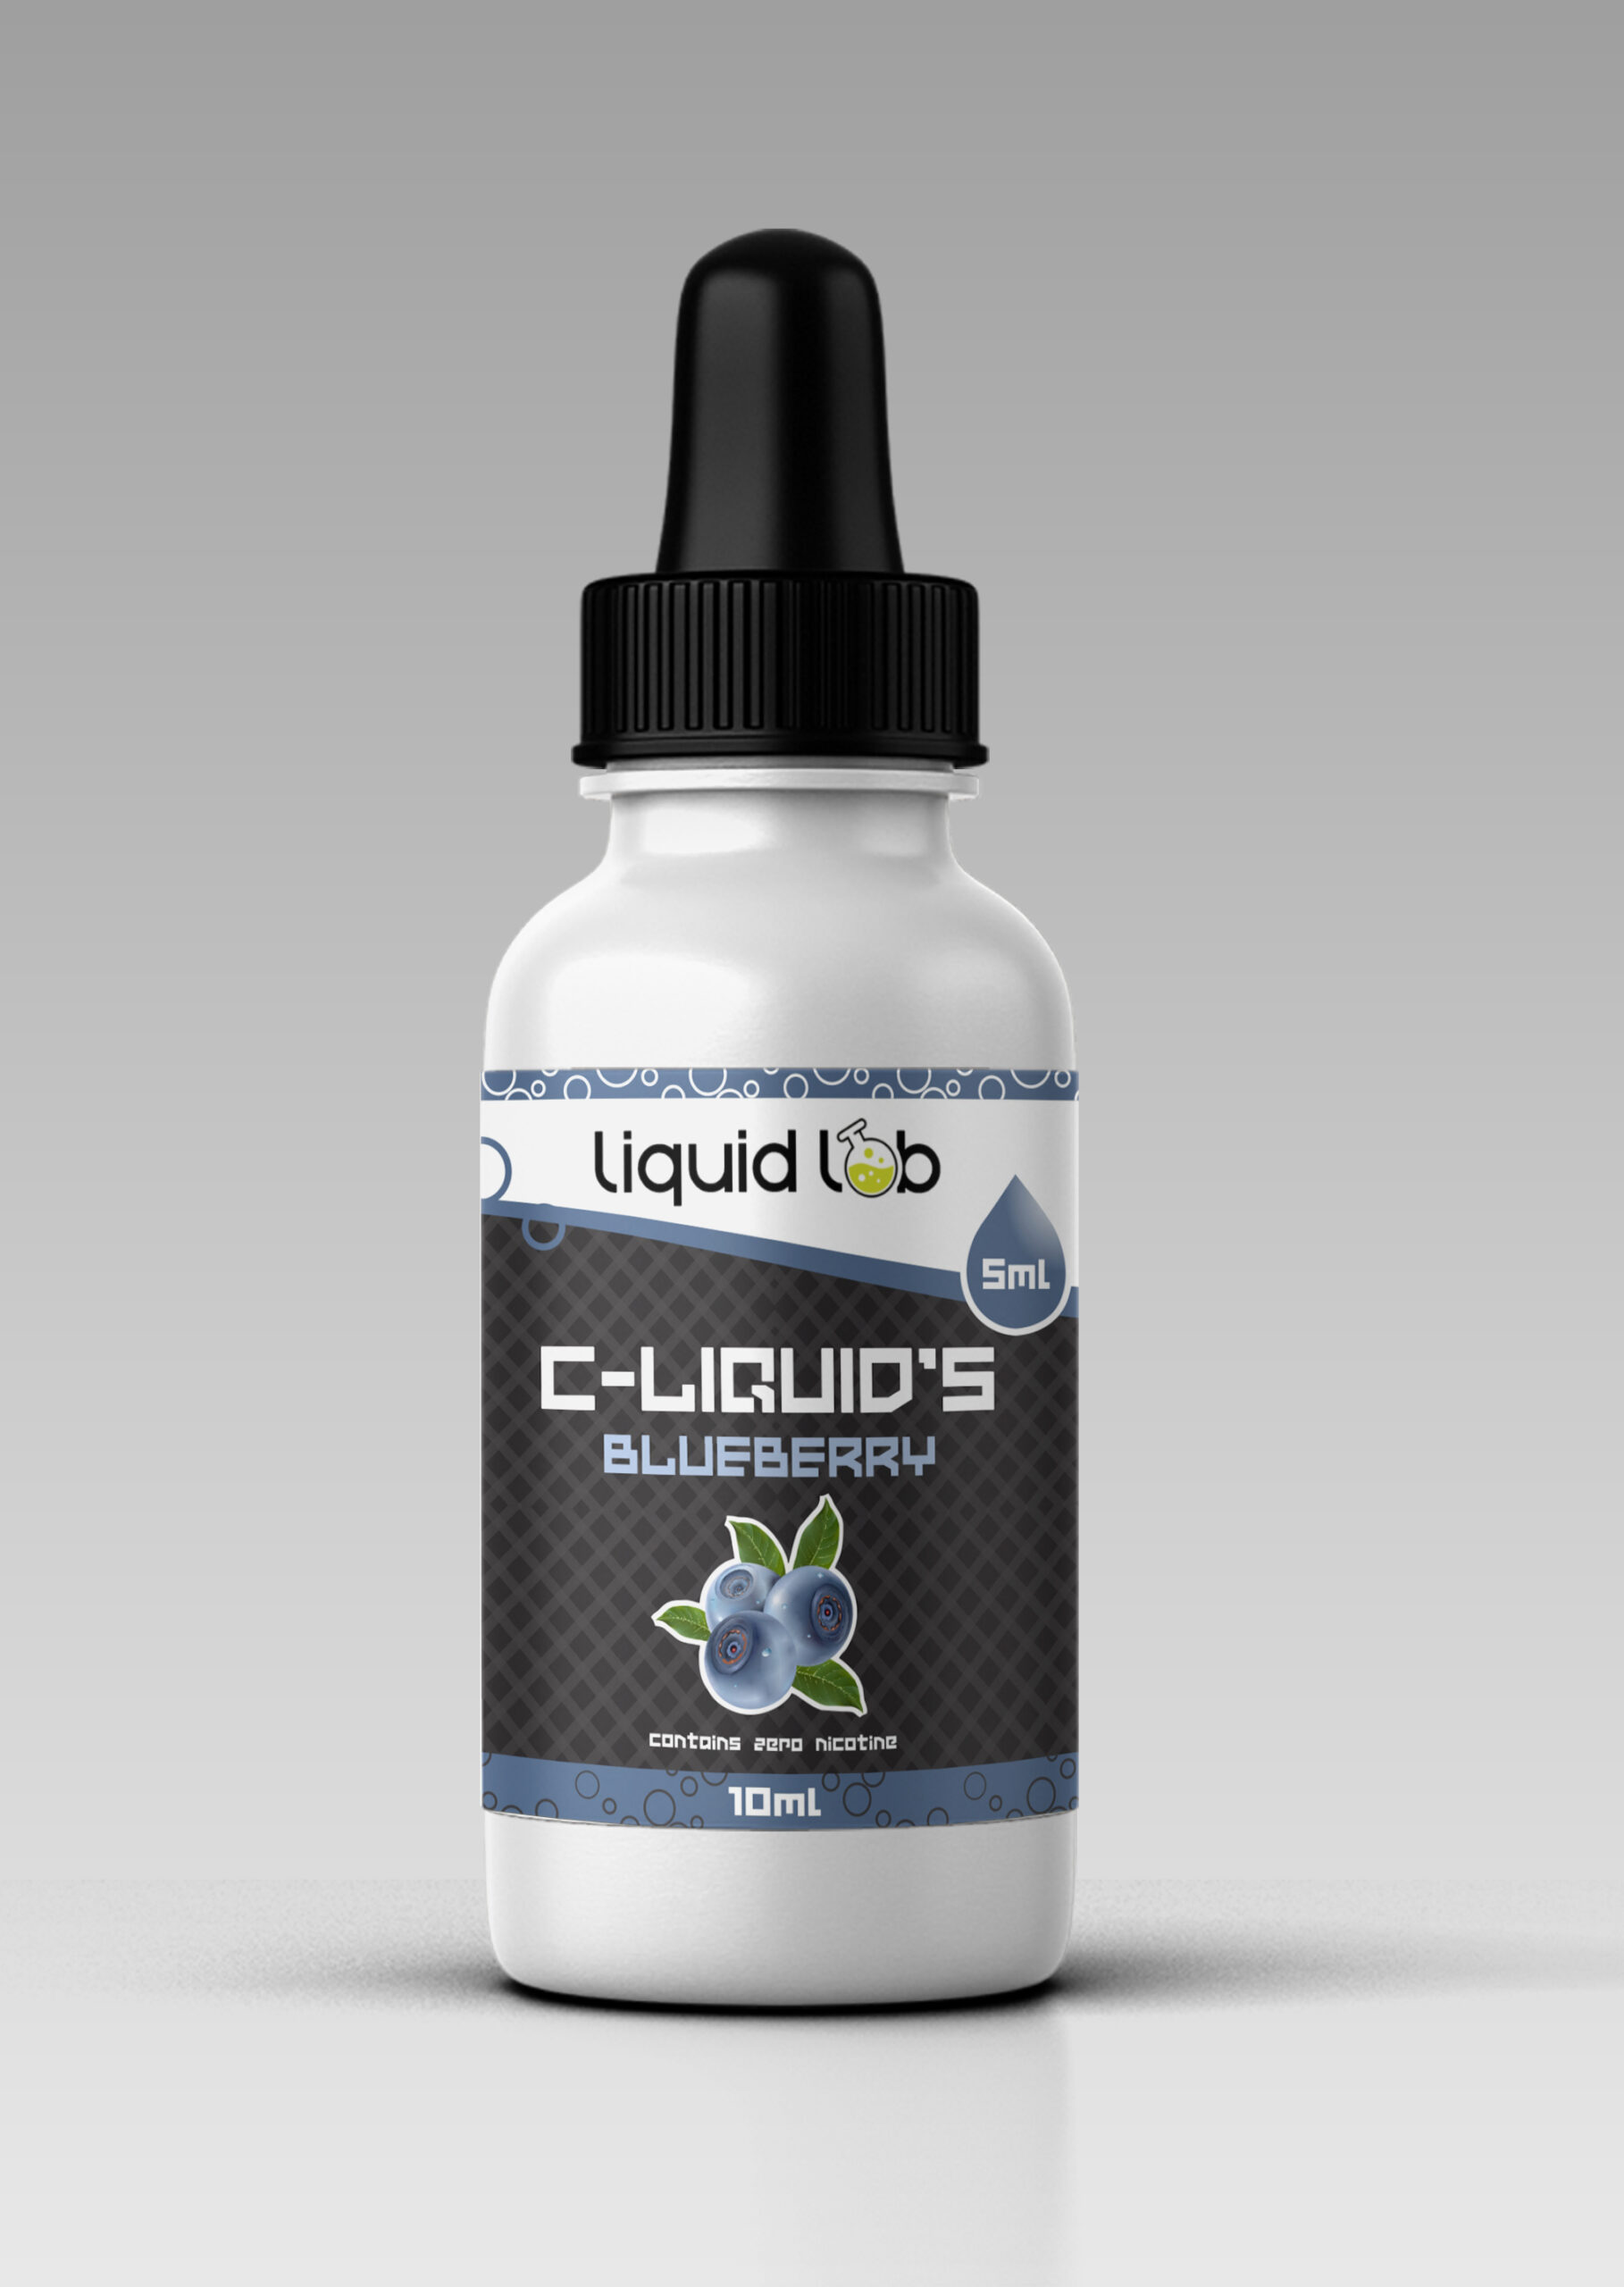 Liquid contains a brand new Cannabinoid called: Methyl (S)-2-[1-(5-fluoropentyl)-1H-indazole-3-carboxamido]-3,3-dimethylbutanoate CAS Number 1715016-75-35ML of chemical suspension is roughly the same as 5-6 grams of herbal blends